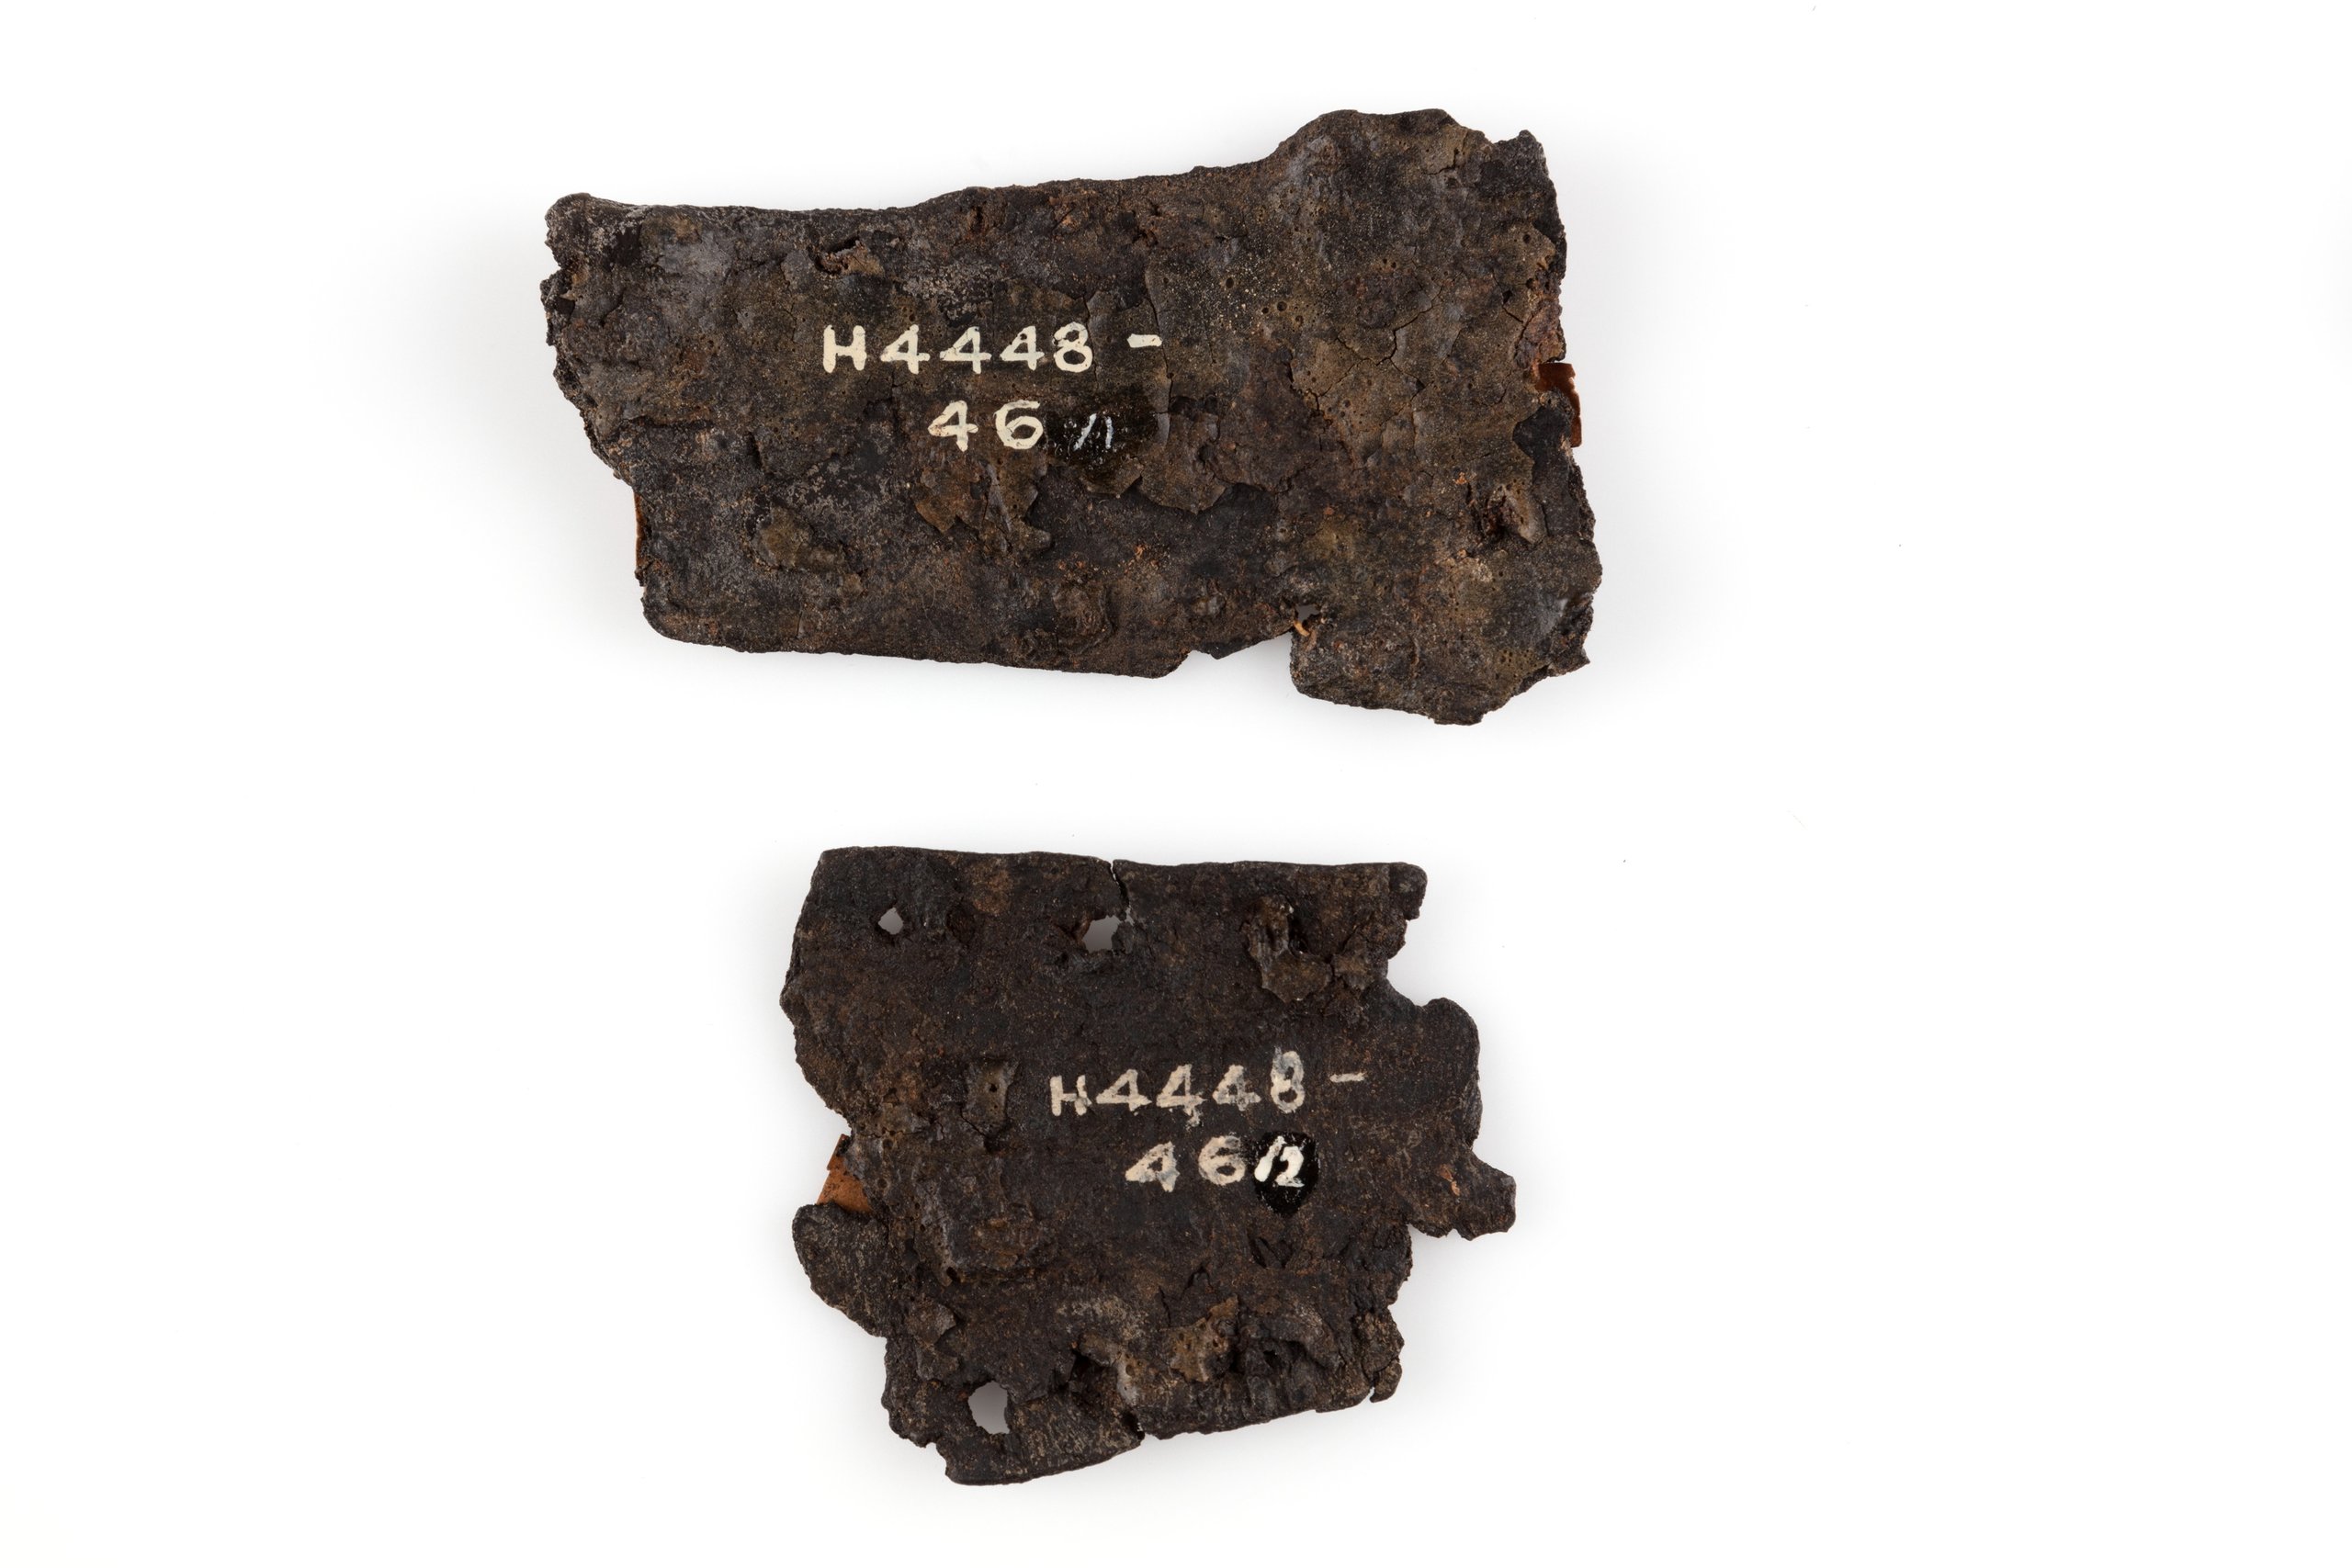 Shoe sole fragments from the Joseph Box collection